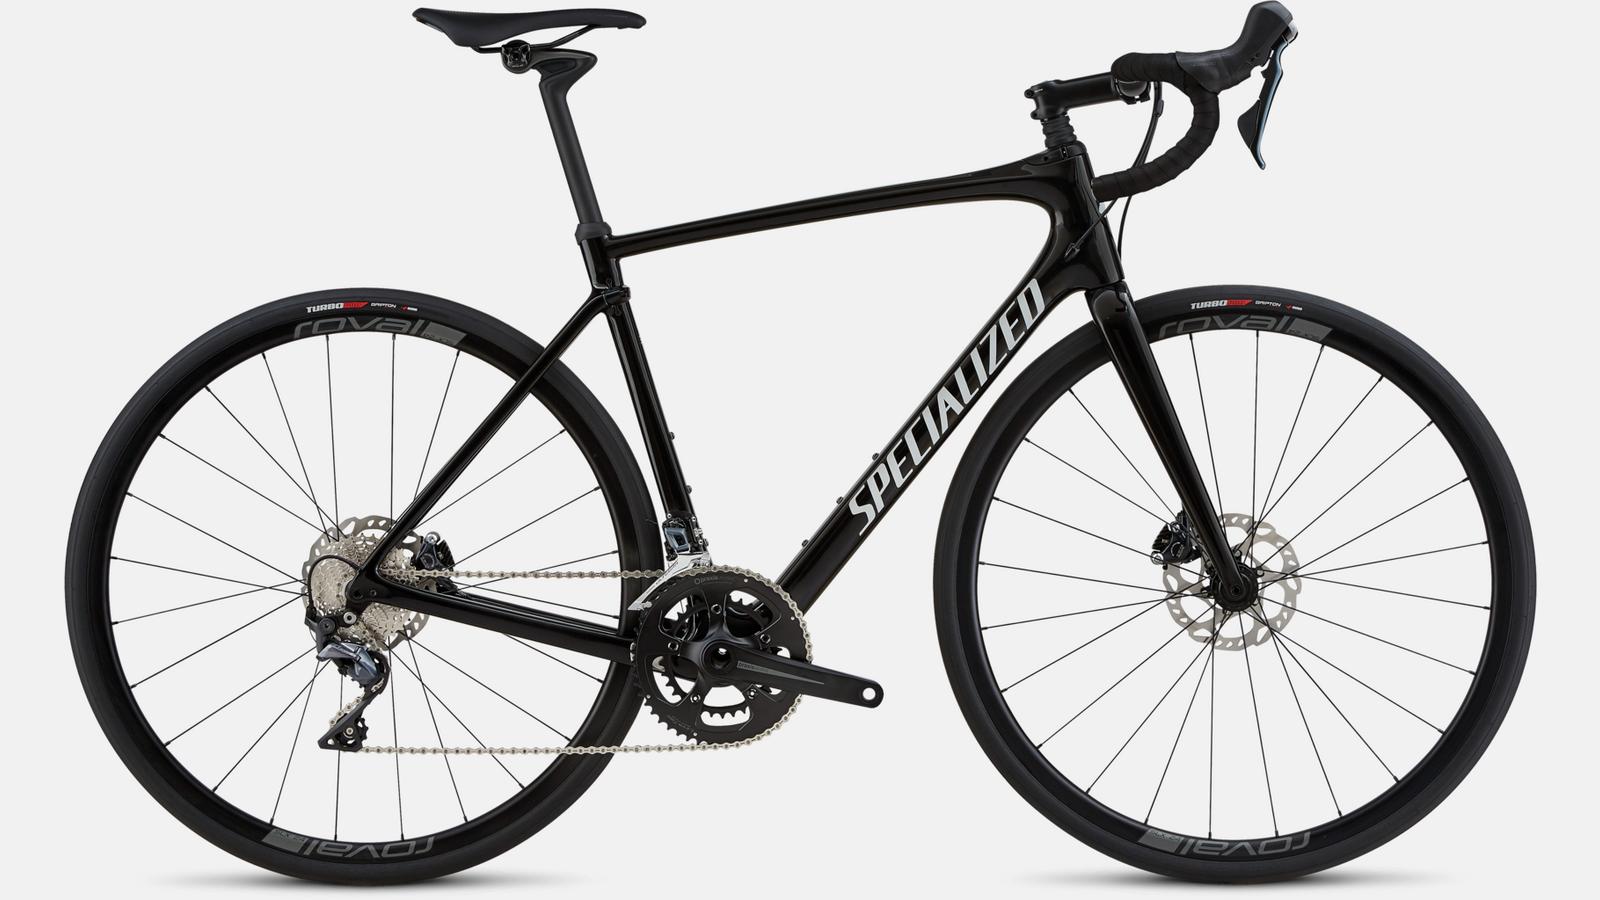 Paint for 2018 Specialized Roubaix Comp - Gloss Tarmac Black